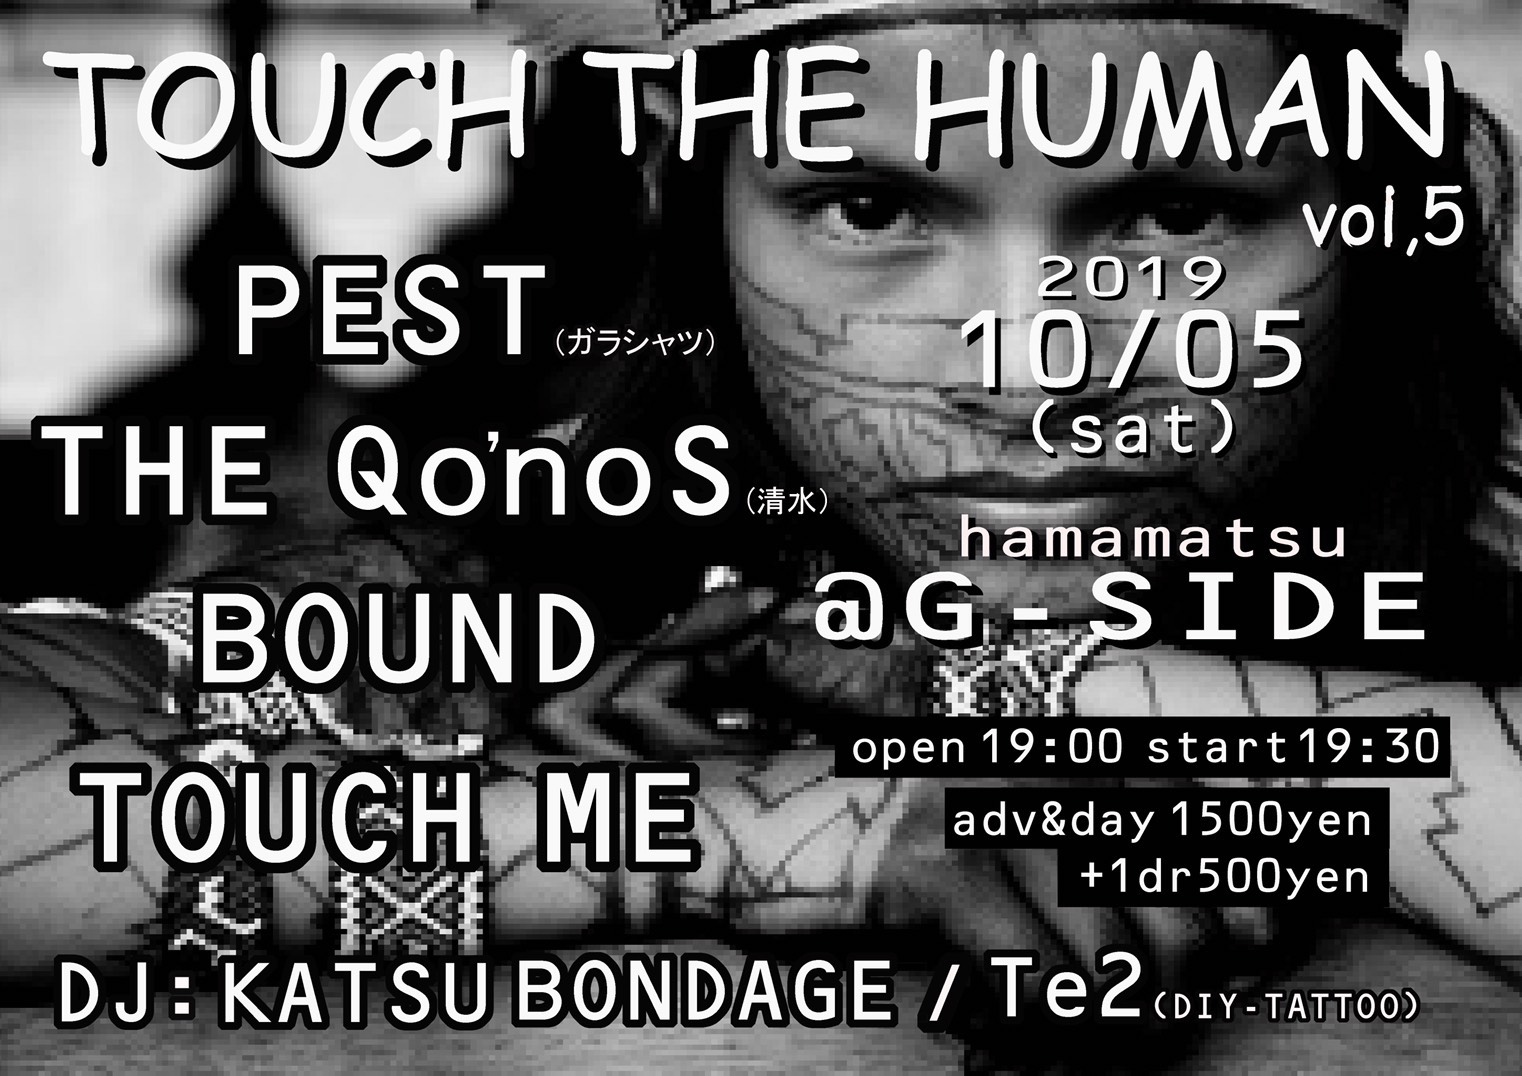 TOUCH THE HUMAN vol.5